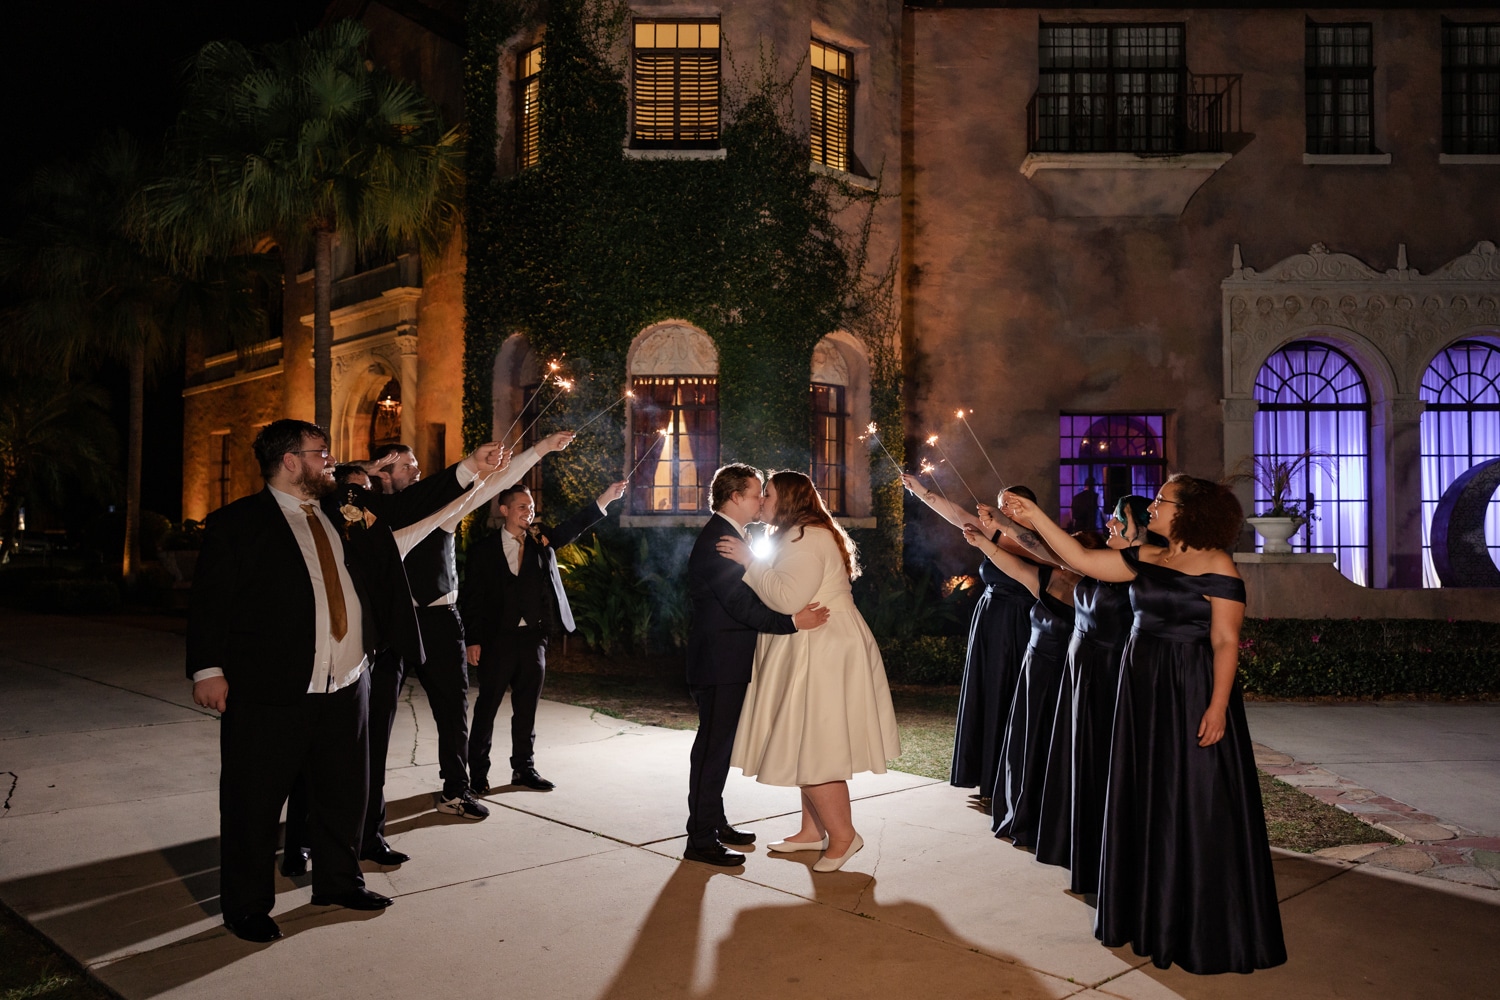 Bride and groom newlyweds kiss as they exit their celestial wedding at Howey Mansion under sparklers.